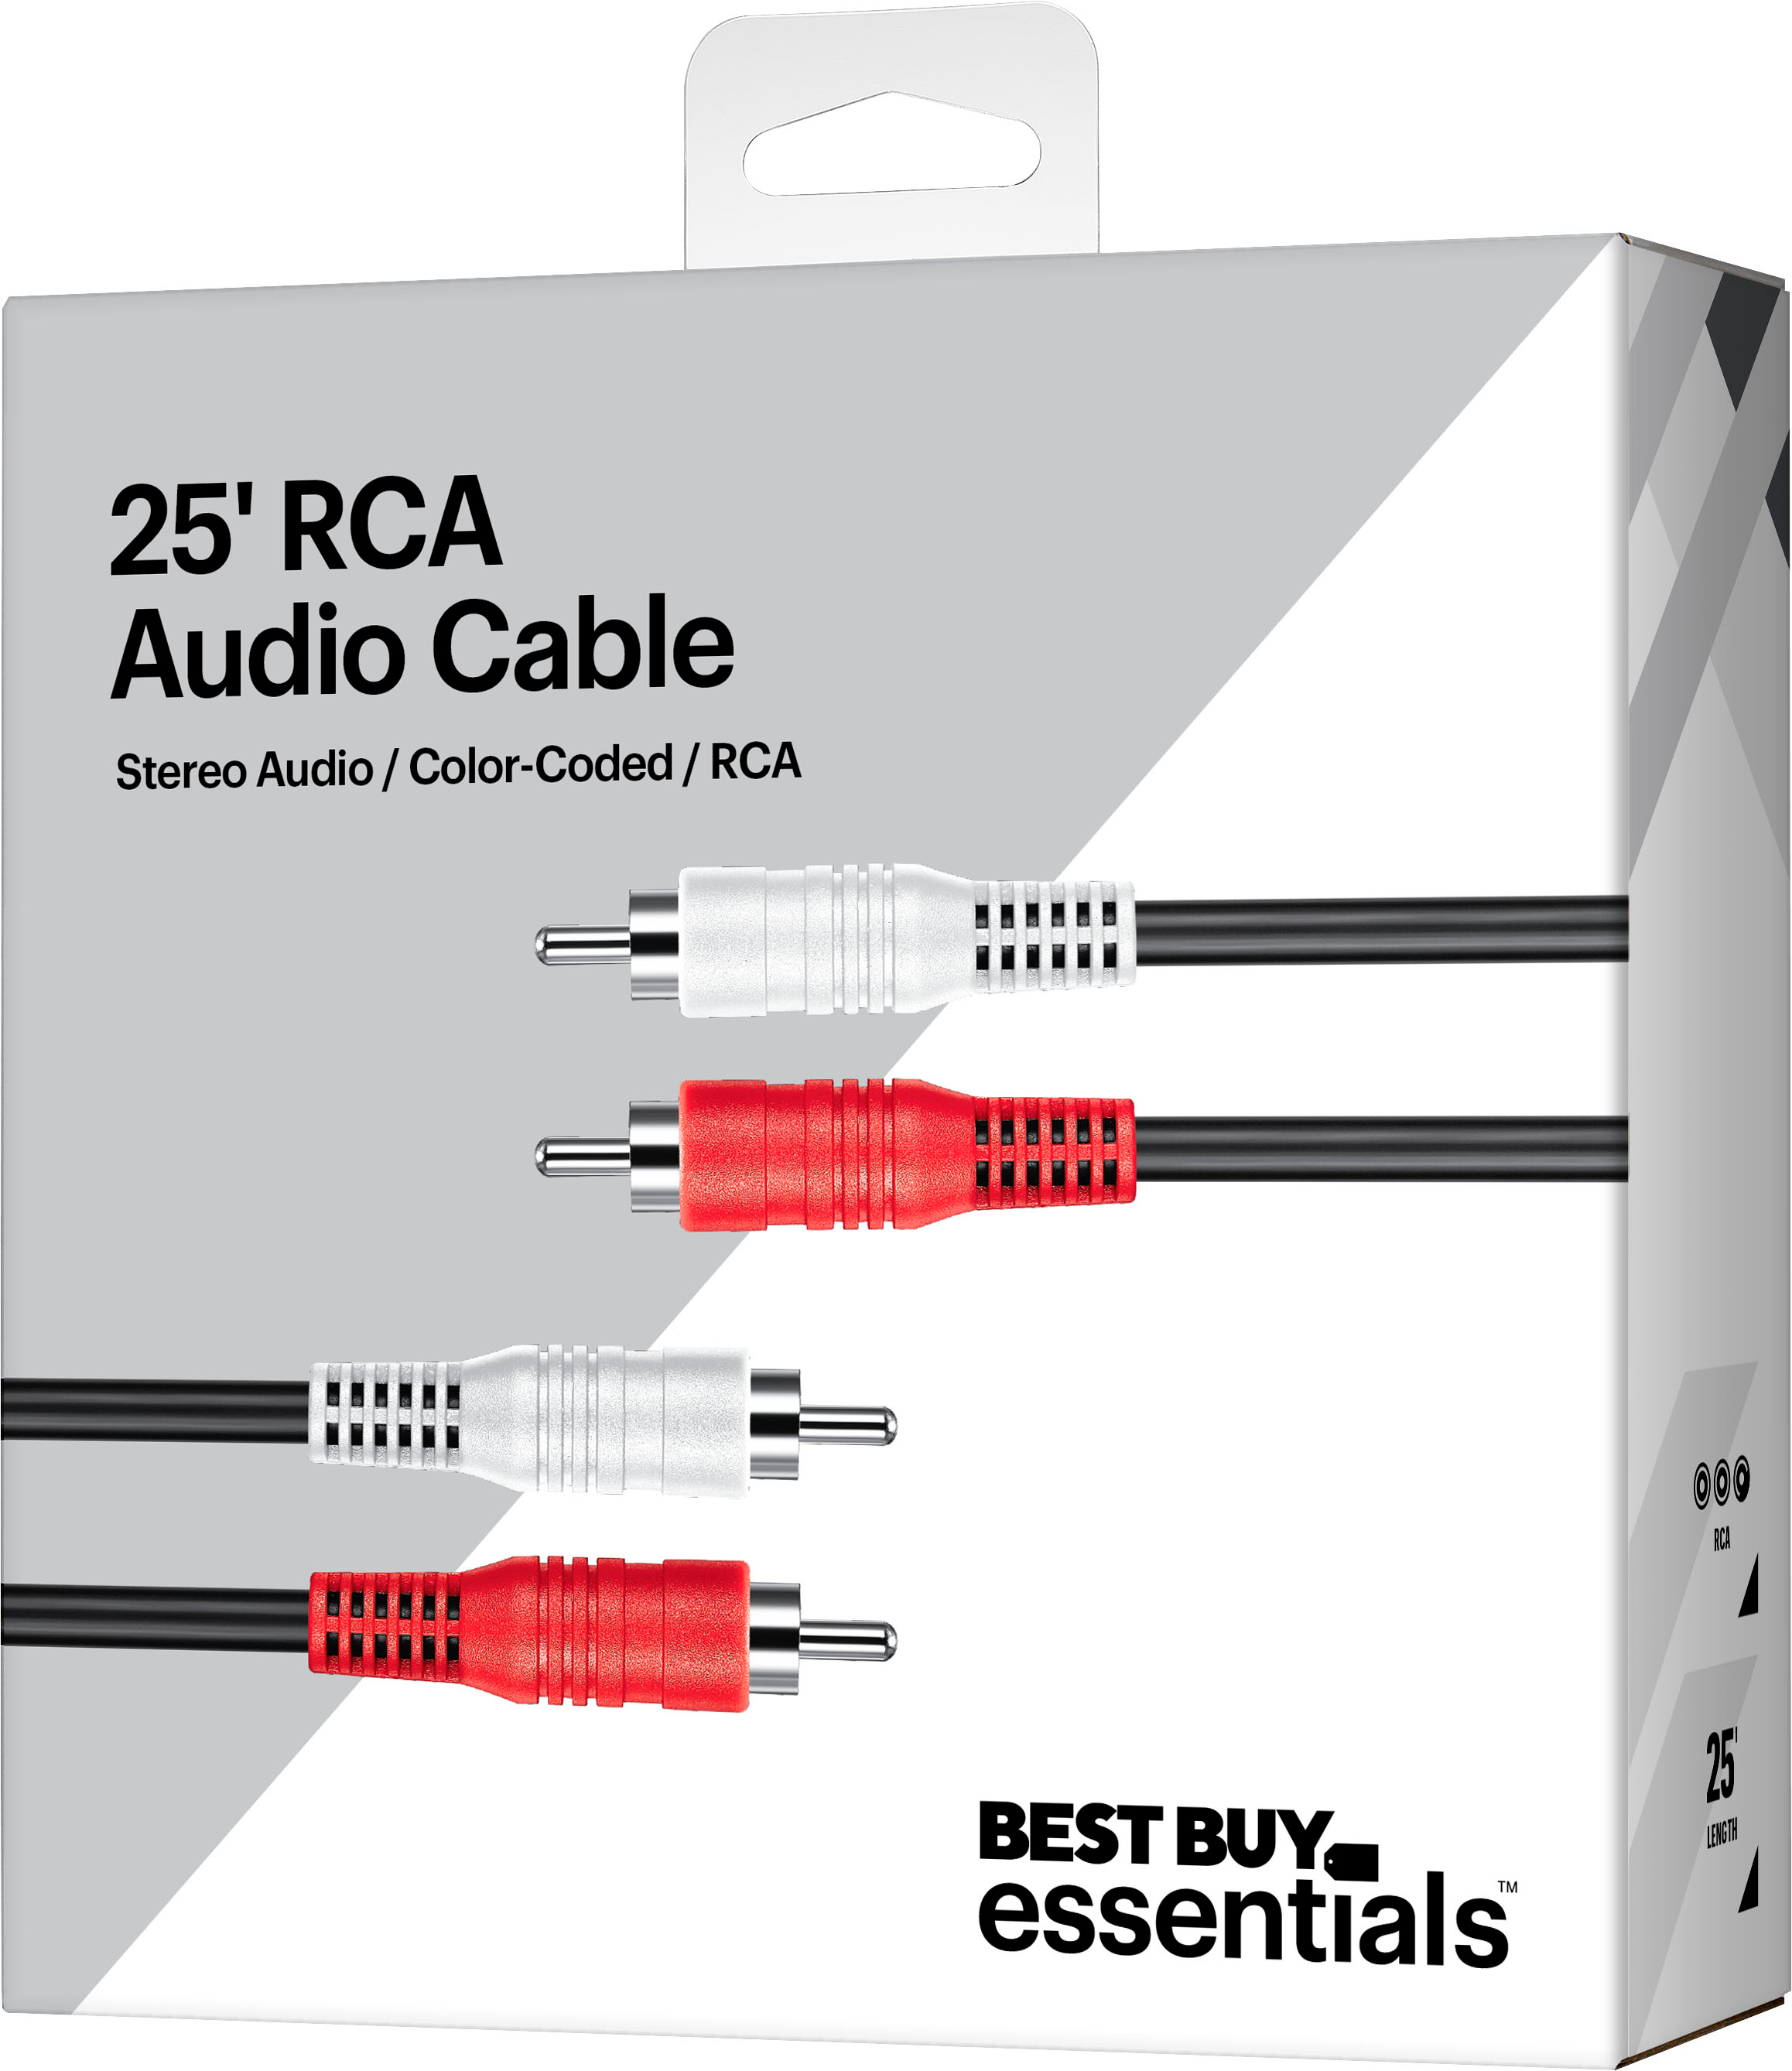 Best Buy essentials™ 6' 3.5 mm to Stereo Audio RCA Cable Black BE